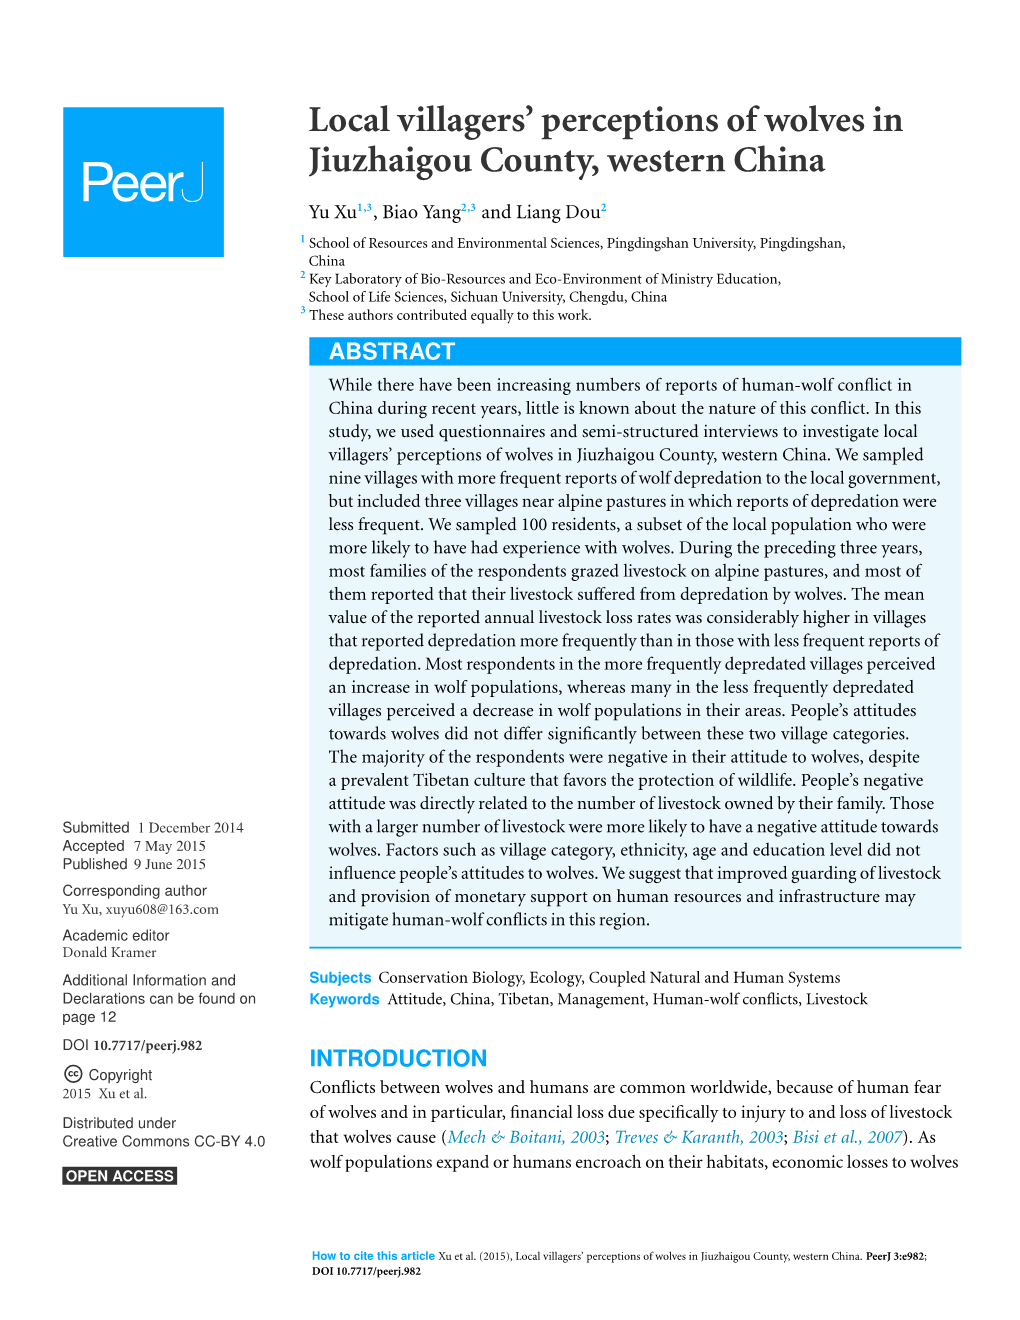 Local Villagers' Perceptions of Wolves in Jiuzhaigou County, Western China